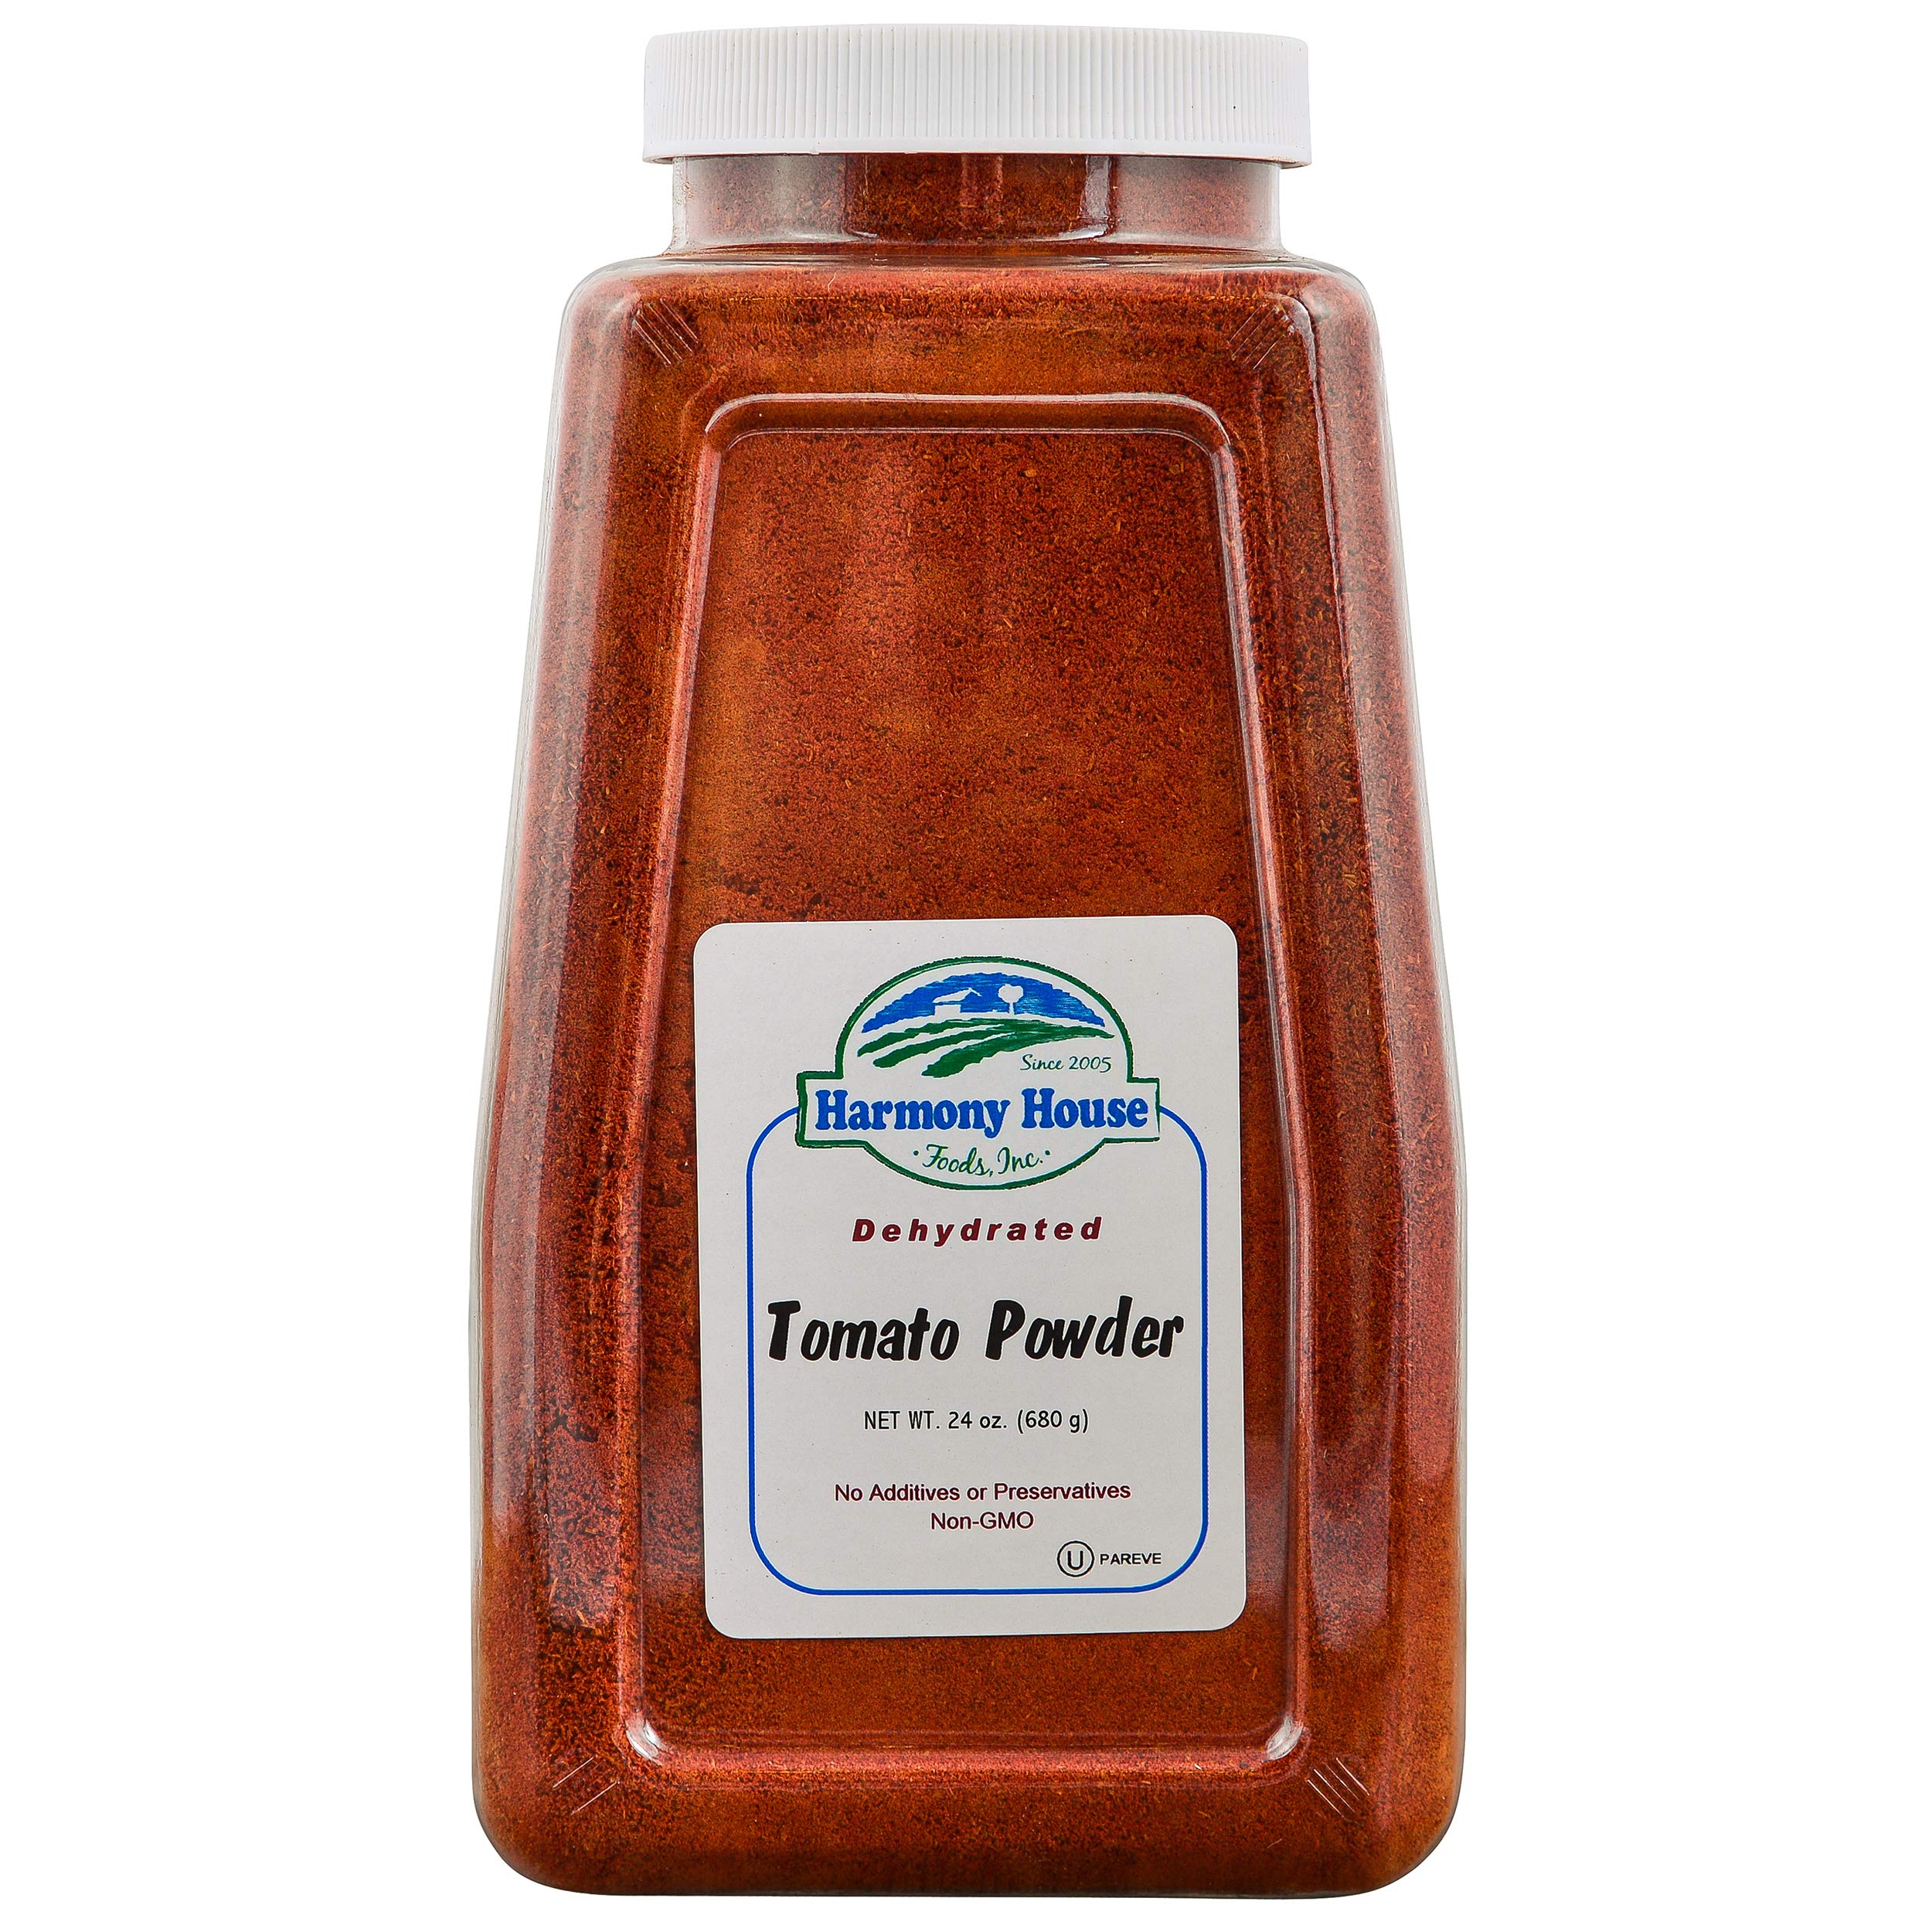 Premium Dehydrated Tomato Powder, 24 oz Size Quart Jar - From Harvest Red Tomatoes by Harmony House Foods